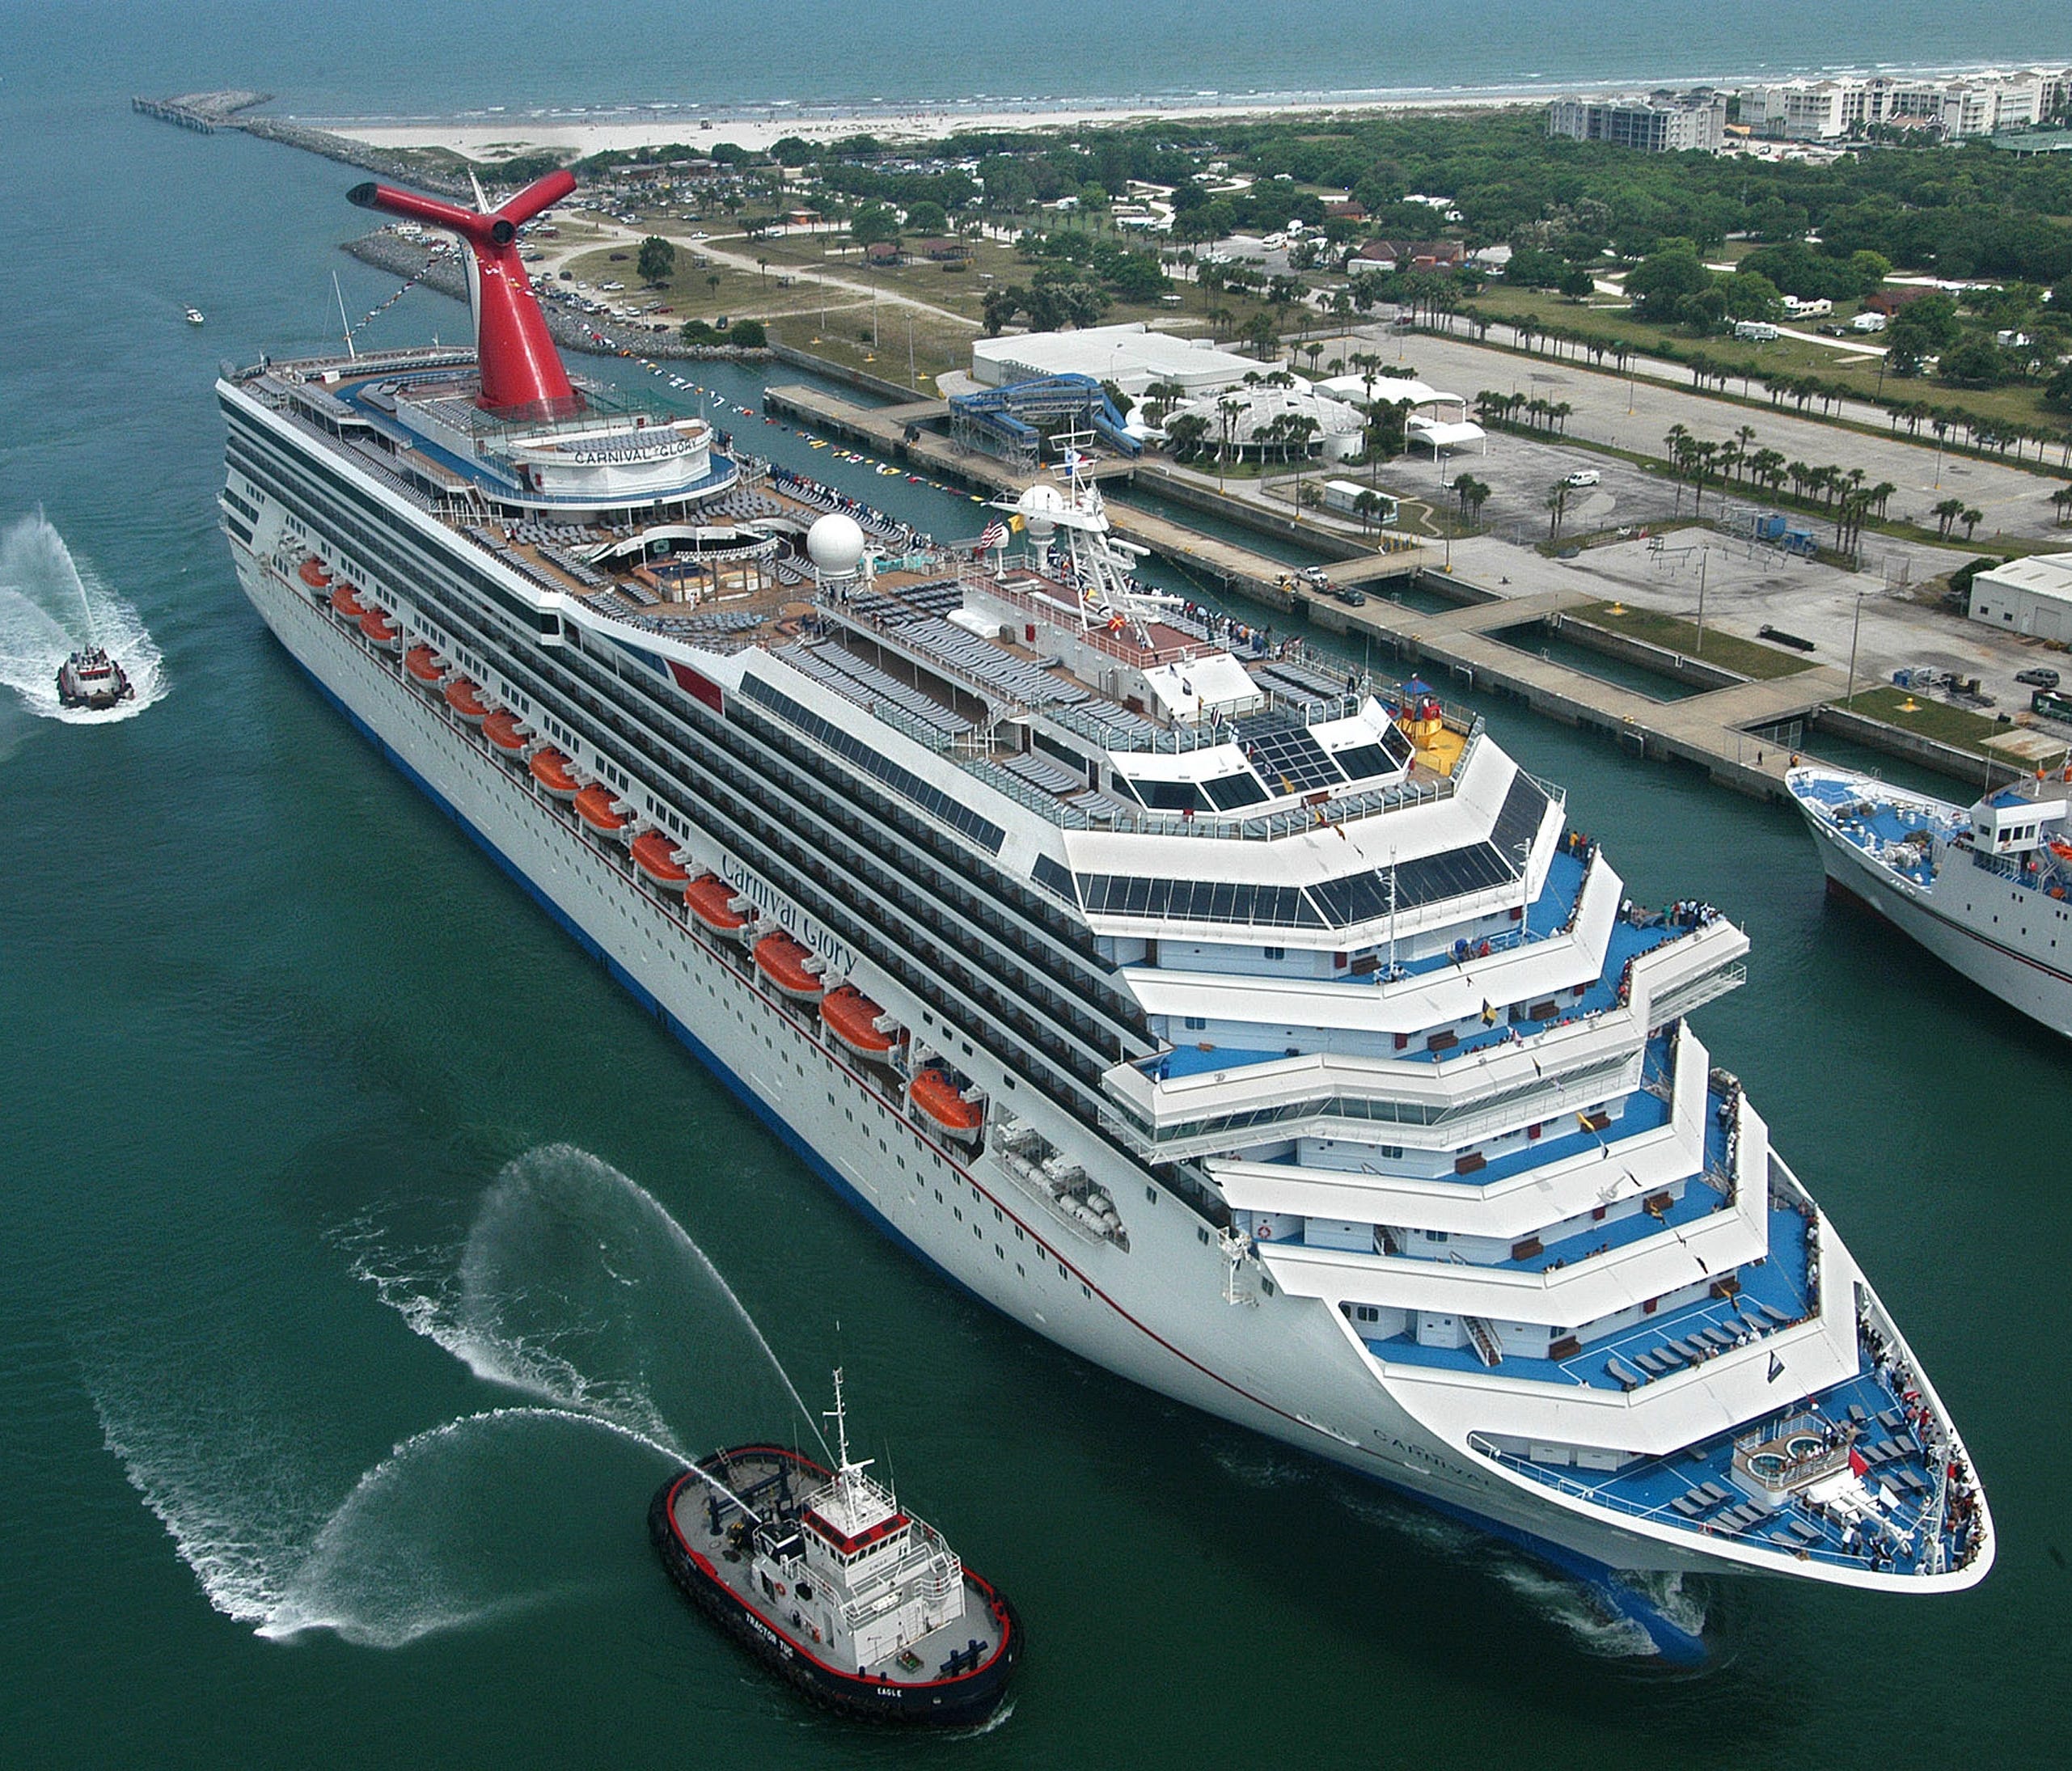 The Carnival Glory arrives July 11, 2003 in Cape Canaveral, Florida.